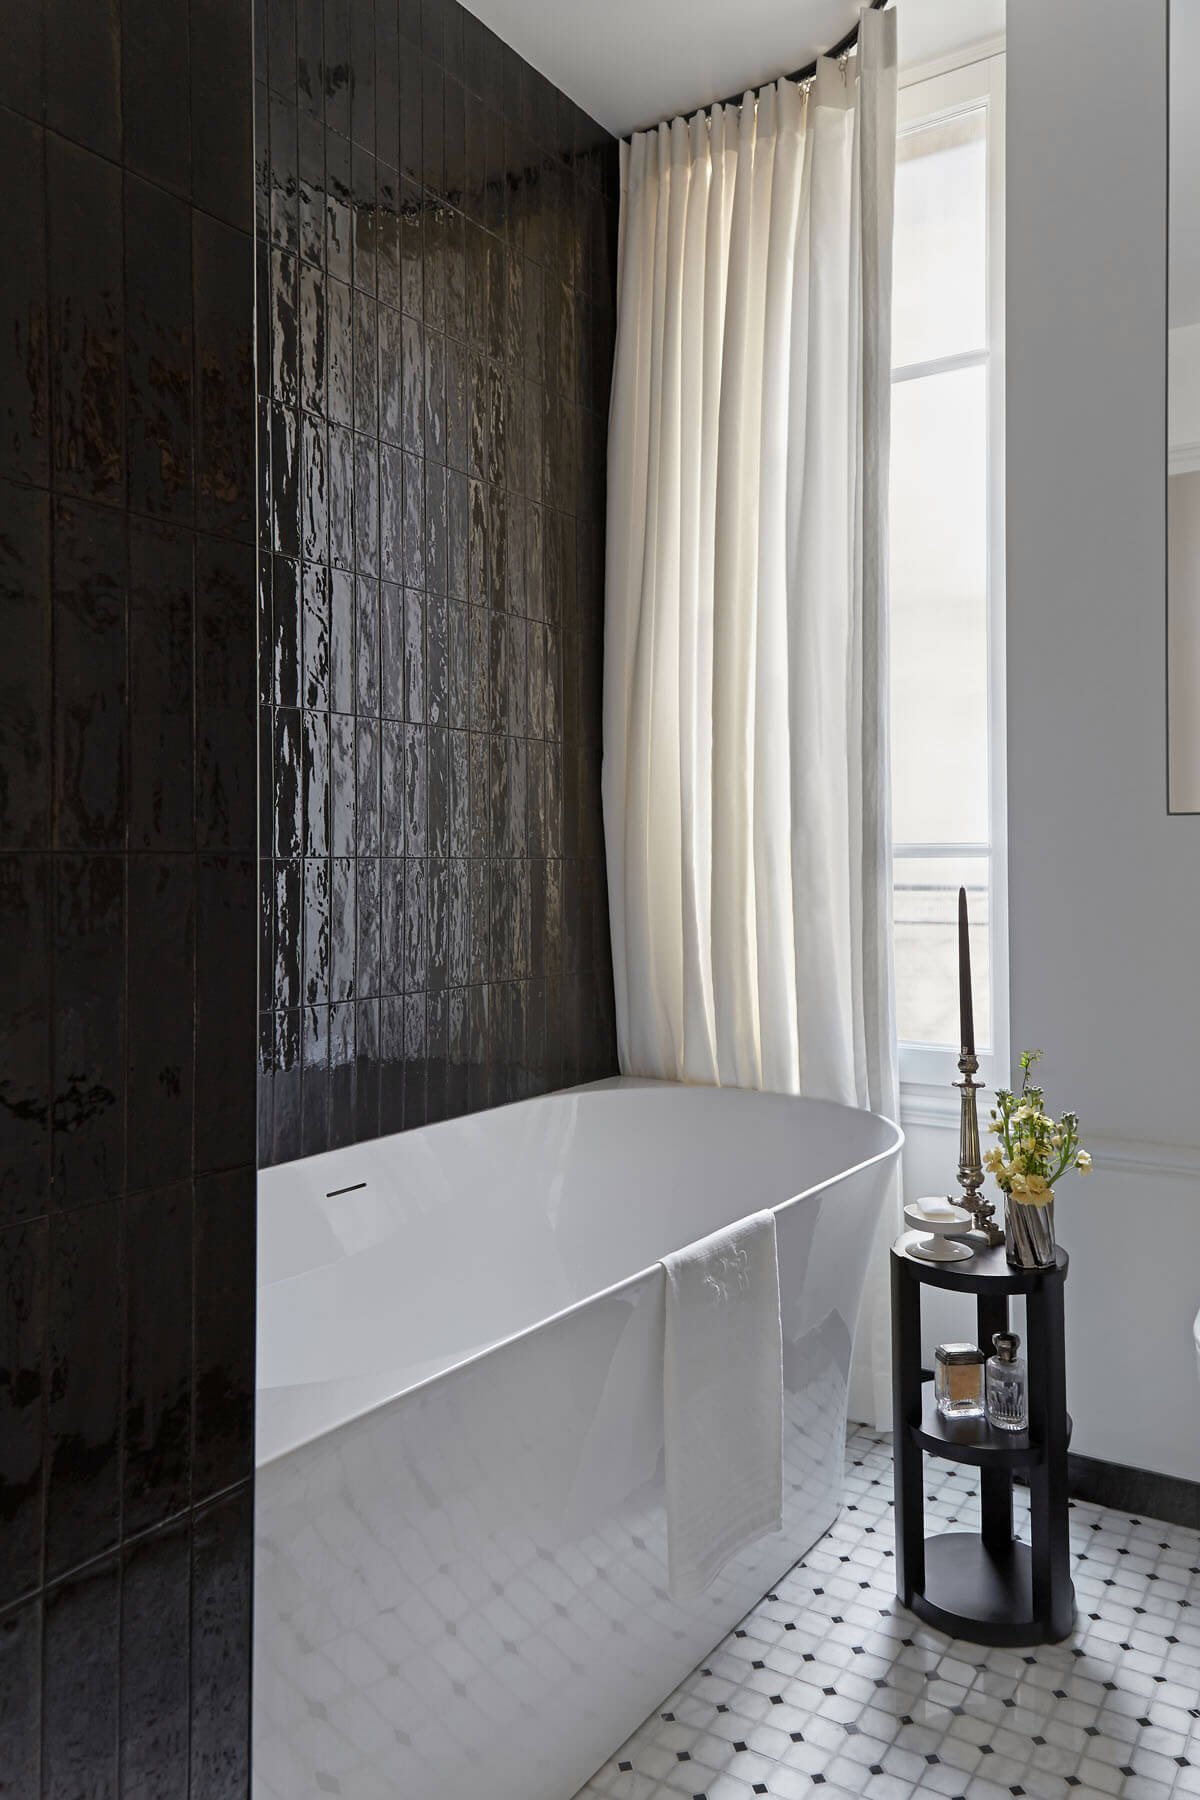  Although there is mostly modern elements in this bathroom there is an old-world charm that I adore. The marble black and white flooring, black tiles, and unlacquered brass fixtures you will see in the next post are a classic mix, but the vertically 